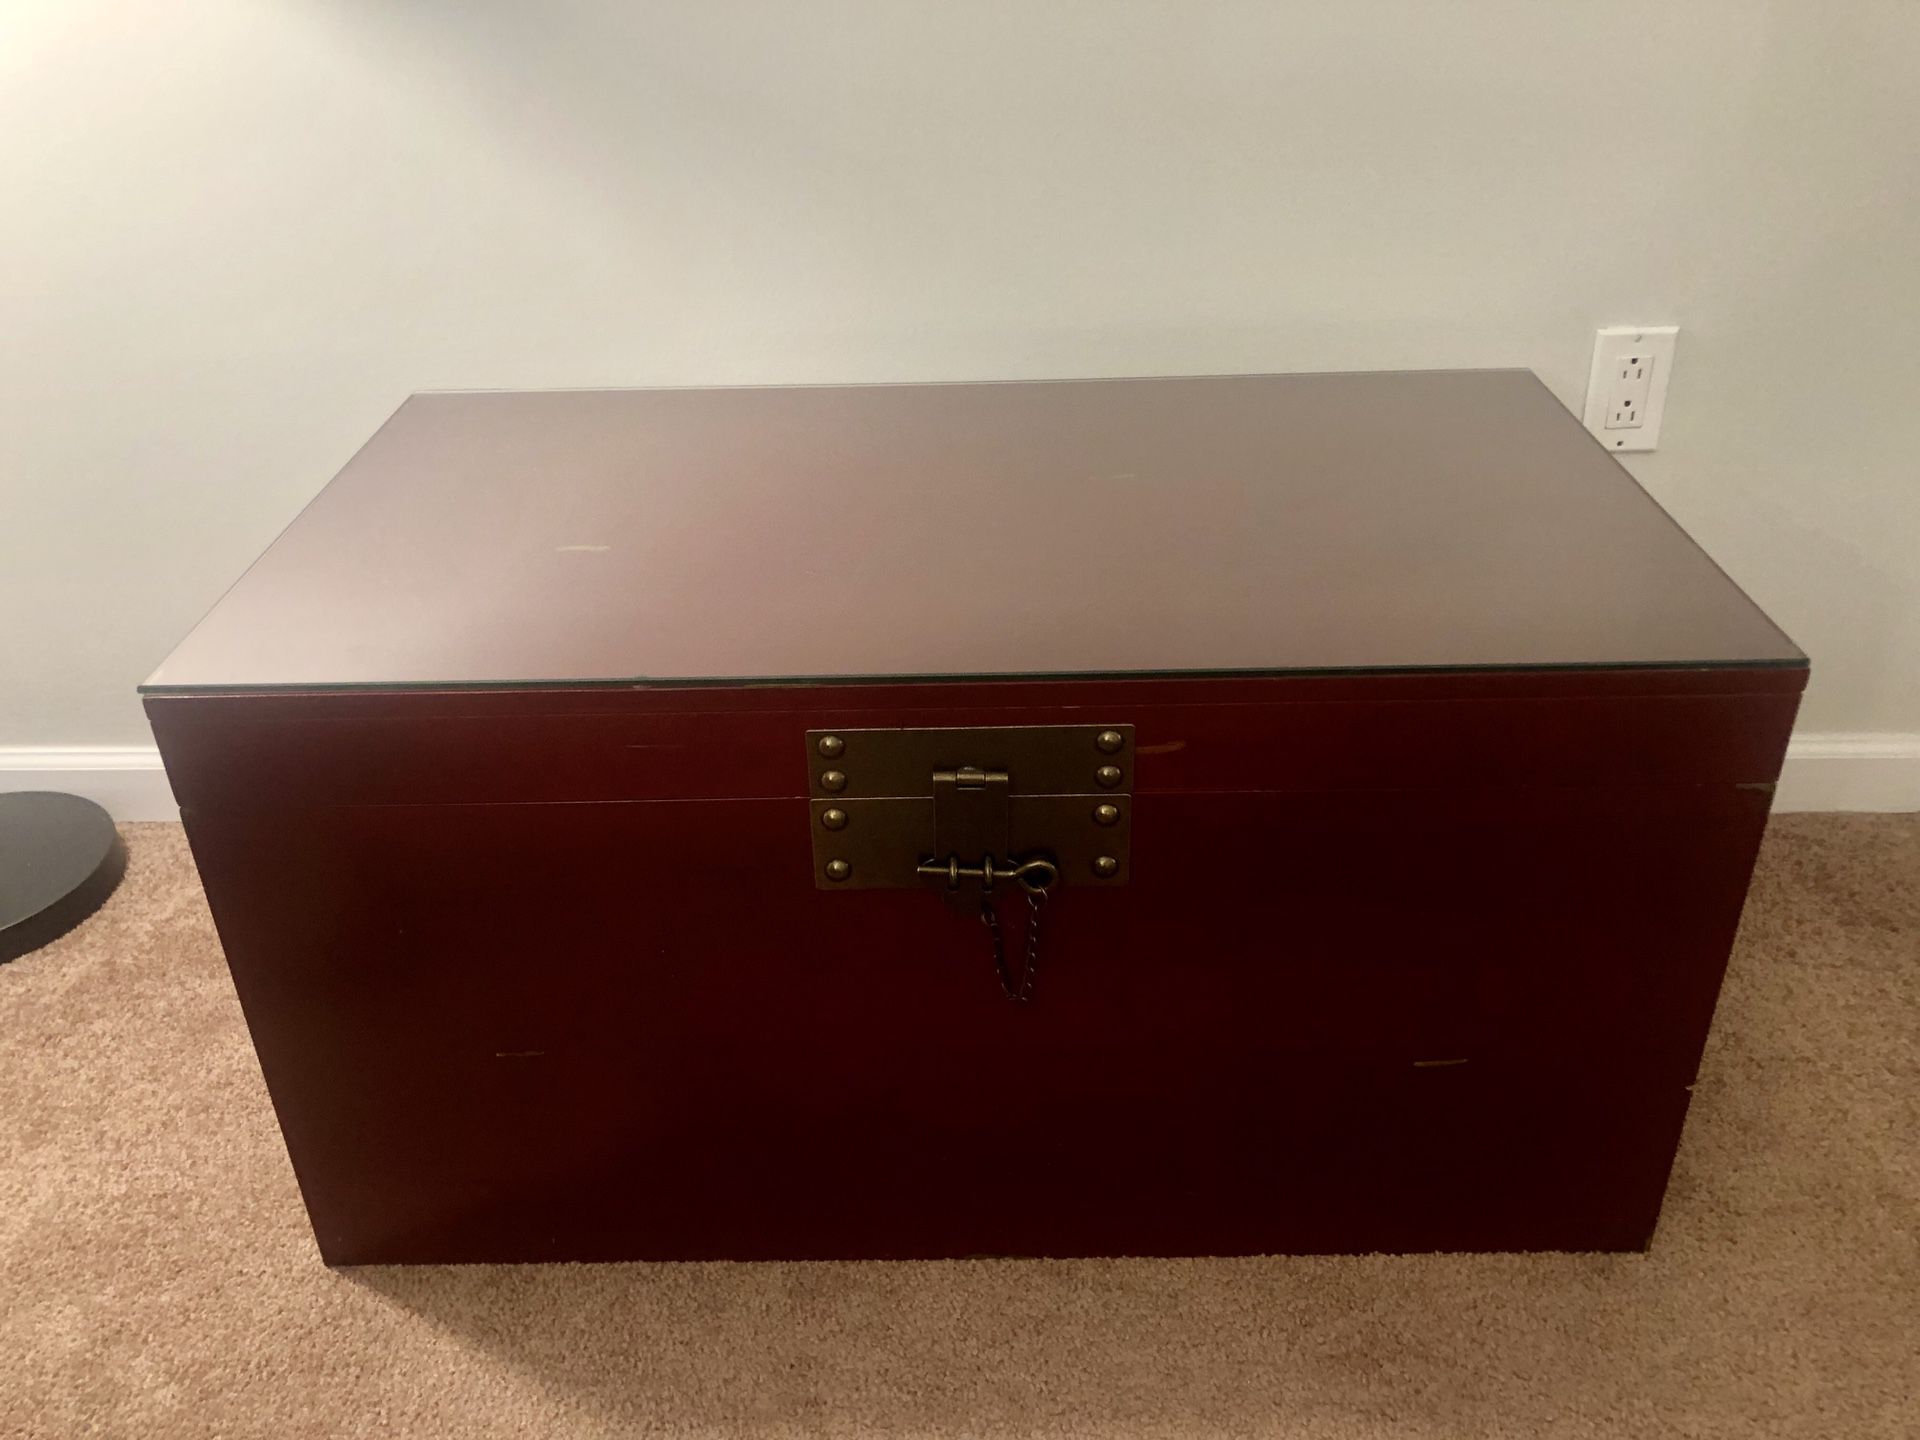 Large Coffee Table - Red wooden trunk